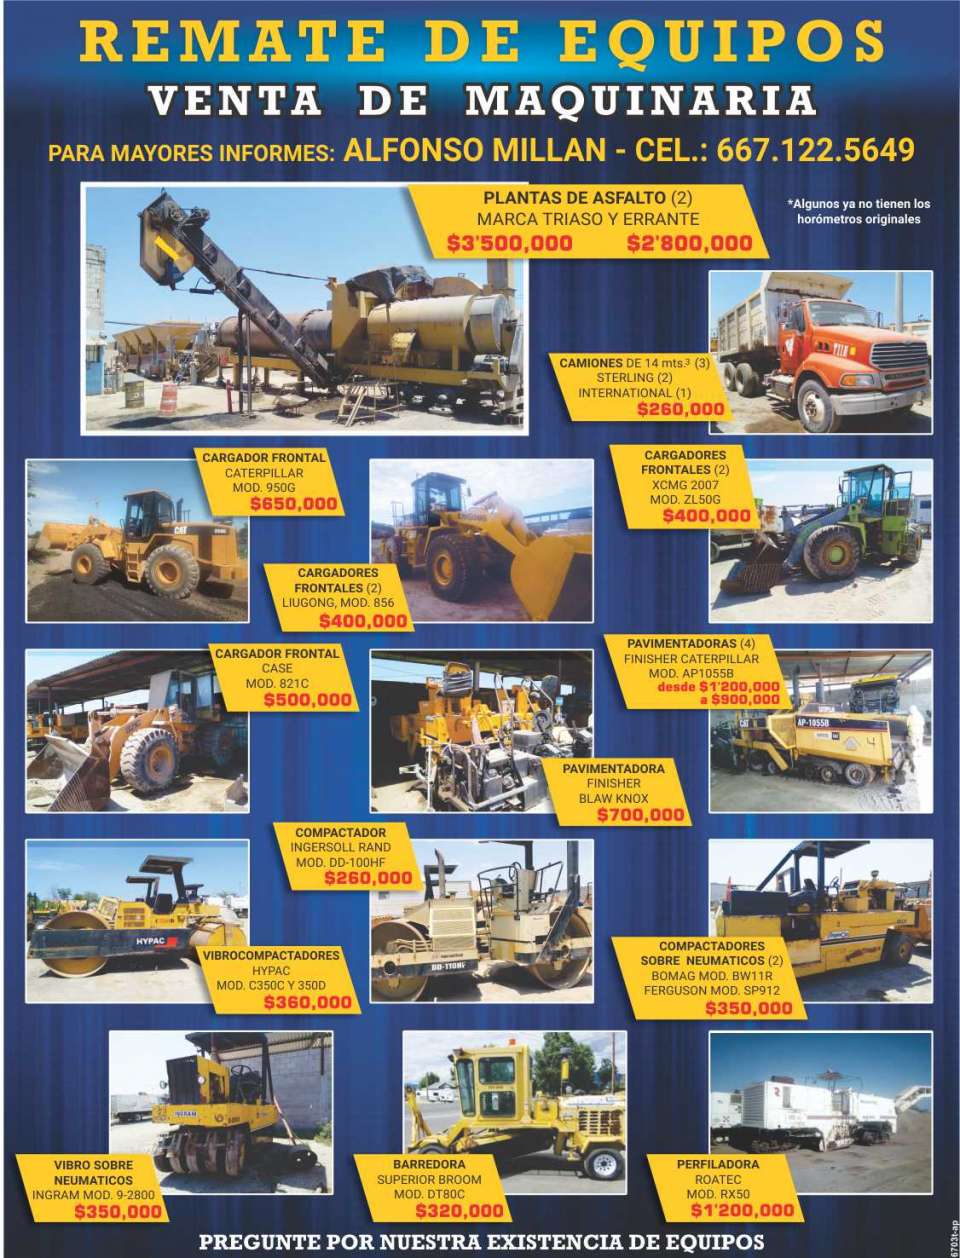 Equipment Auction, Machinery Sales, ask about our existence of equipment